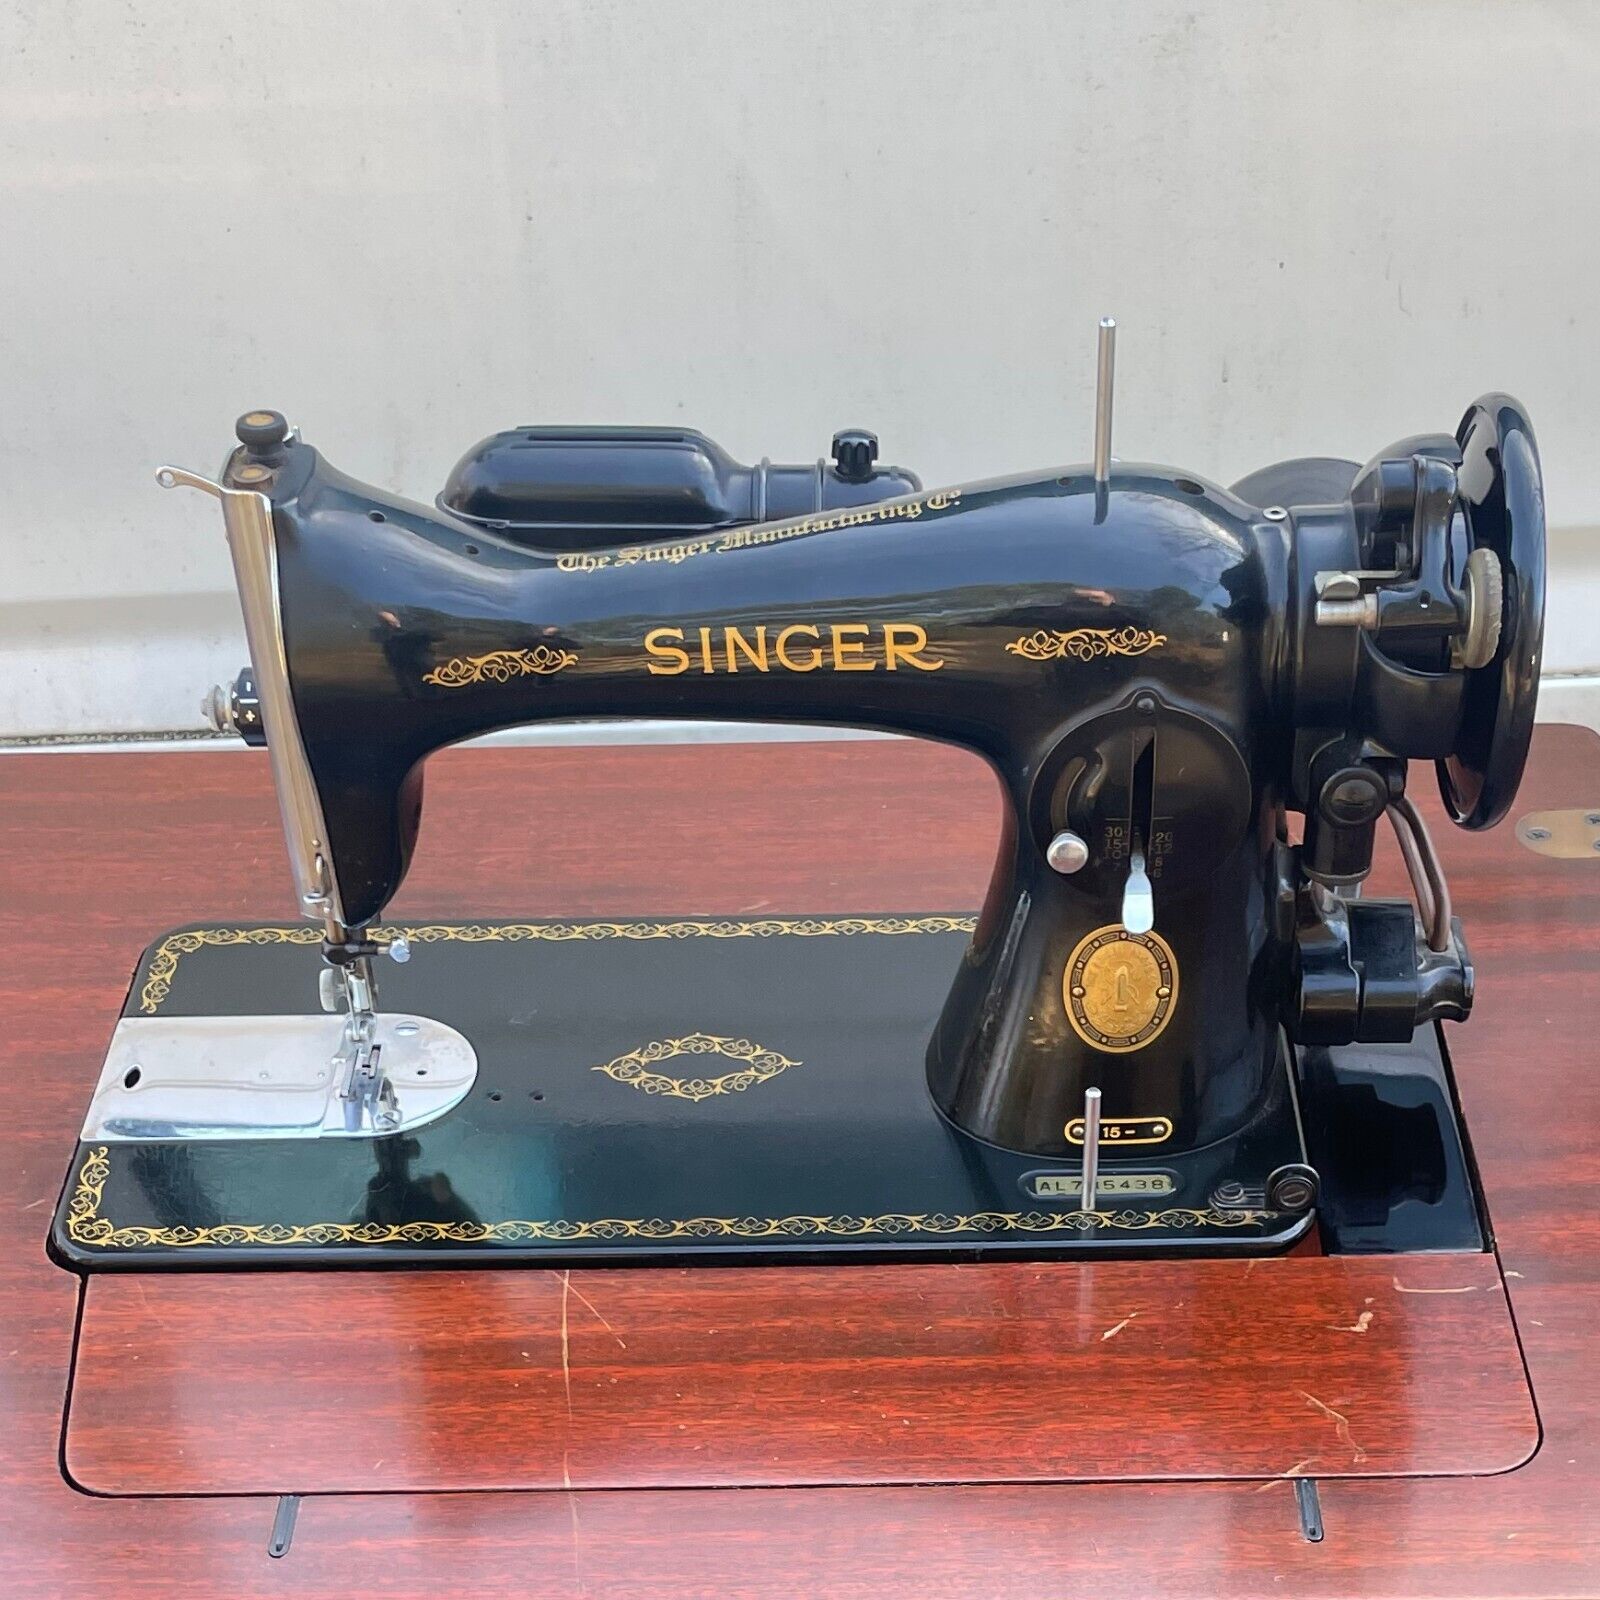 Singer 1954 Model 15 Sewing Machine with Table Tested Works Great